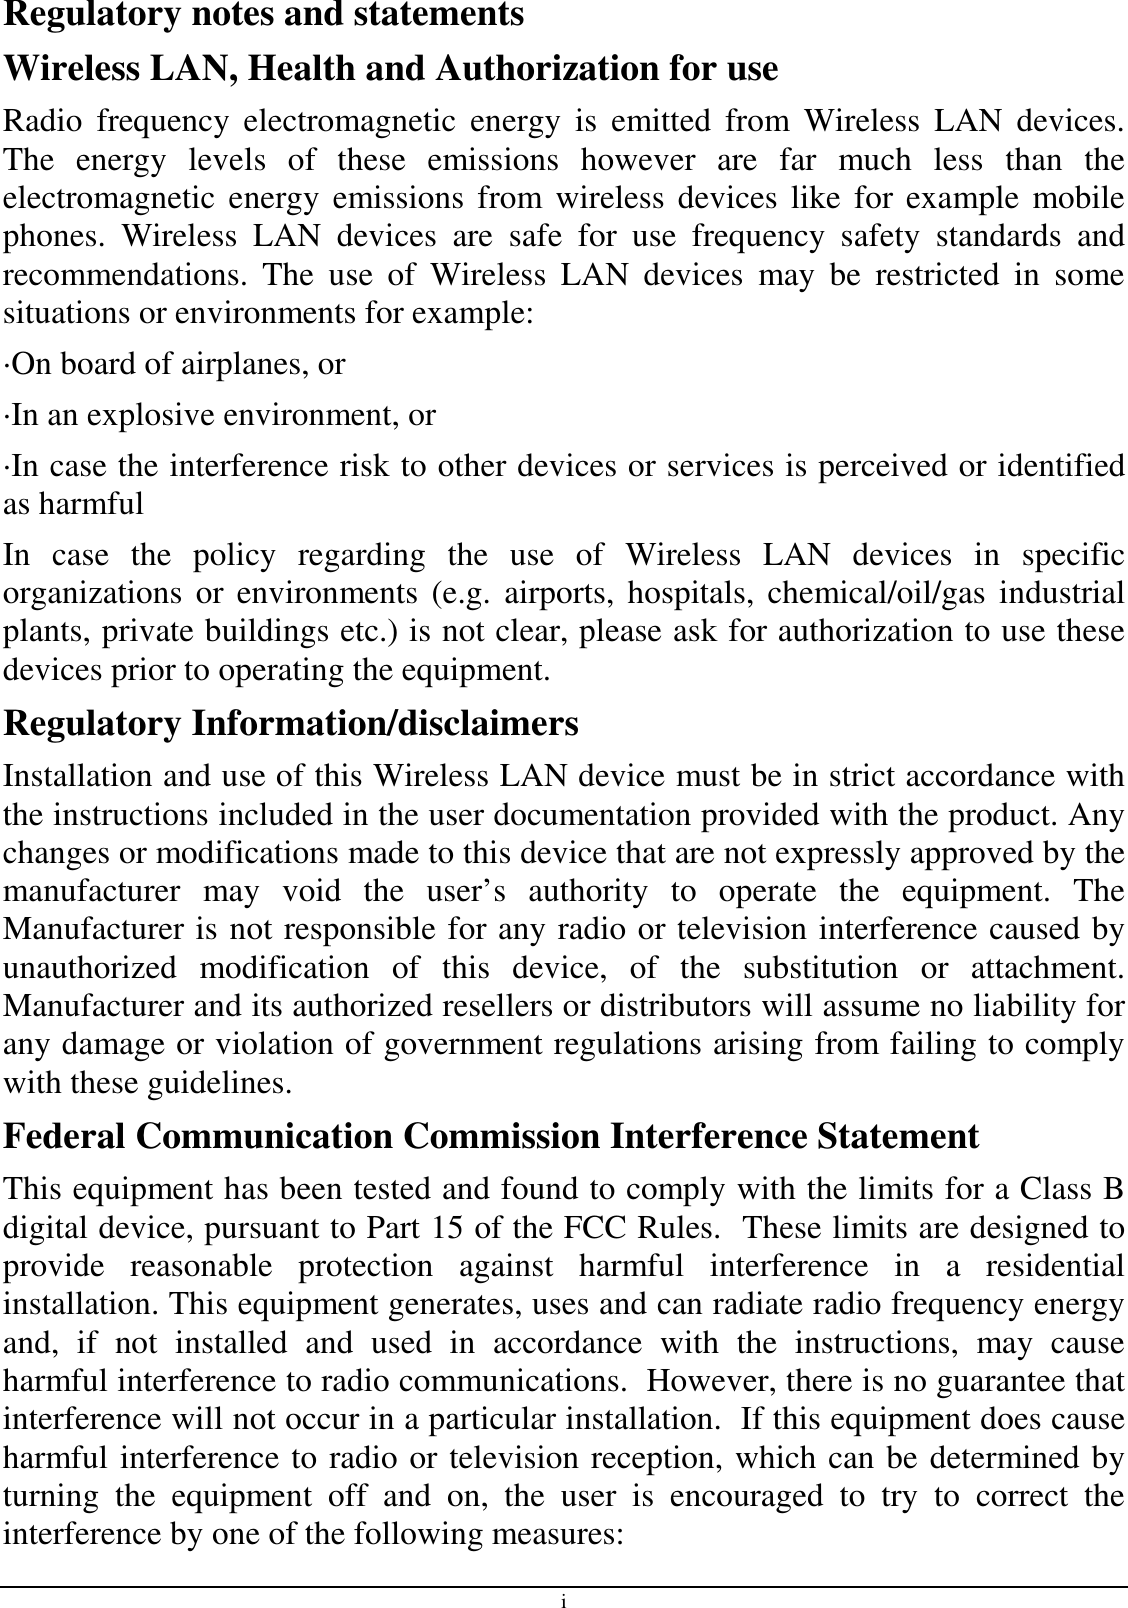 i Regulatory notes and statements Wireless LAN, Health and Authorization for use Radio  frequency  electromagnetic  energy  is  emitted  from  Wireless  LAN  devices. The  energy  levels  of  these  emissions  however  are  far  much  less  than  the electromagnetic  energy  emissions  from wireless devices like for example  mobile phones.  Wireless  LAN  devices  are  safe  for  use  frequency  safety  standards  and recommendations.  The  use  of  Wireless  LAN  devices  may  be  restricted  in  some situations or environments for example: ·On board of airplanes, or ·In an explosive environment, or ·In case the interference risk to other devices or services is perceived or identified as harmful In  case  the  policy  regarding  the  use  of  Wireless  LAN  devices  in  specific organizations  or environments  (e.g.  airports,  hospitals, chemical/oil/gas  industrial plants, private buildings etc.) is not clear, please ask for authorization to use these devices prior to operating the equipment. Regulatory Information/disclaimers Installation and use of this Wireless LAN device must be in strict accordance with the instructions included in the user documentation provided with the product. Any changes or modifications made to this device that are not expressly approved by the manufacturer  may  void  the  user’s  authority  to  operate  the  equipment.  The Manufacturer is not responsible for any radio or television interference caused by unauthorized  modification  of  this  device,  of  the  substitution  or  attachment. Manufacturer and its authorized resellers or distributors will assume no liability for any damage or violation of government regulations arising from failing to comply with these guidelines. Federal Communication Commission Interference Statement This equipment has been tested and found to comply with the limits for a Class B digital device, pursuant to Part 15 of the FCC Rules.  These limits are designed to provide  reasonable  protection  against  harmful  interference  in  a  residential installation. This equipment generates, uses and can radiate radio frequency energy and,  if  not  installed  and  used  in  accordance  with  the  instructions,  may  cause harmful interference to radio communications.  However, there is no guarantee that interference will not occur in a particular installation.  If this equipment does cause harmful interference to radio or television reception, which can be determined by turning  the  equipment  off  and  on,  the  user  is  encouraged  to  try  to  correct  the interference by one of the following measures: 